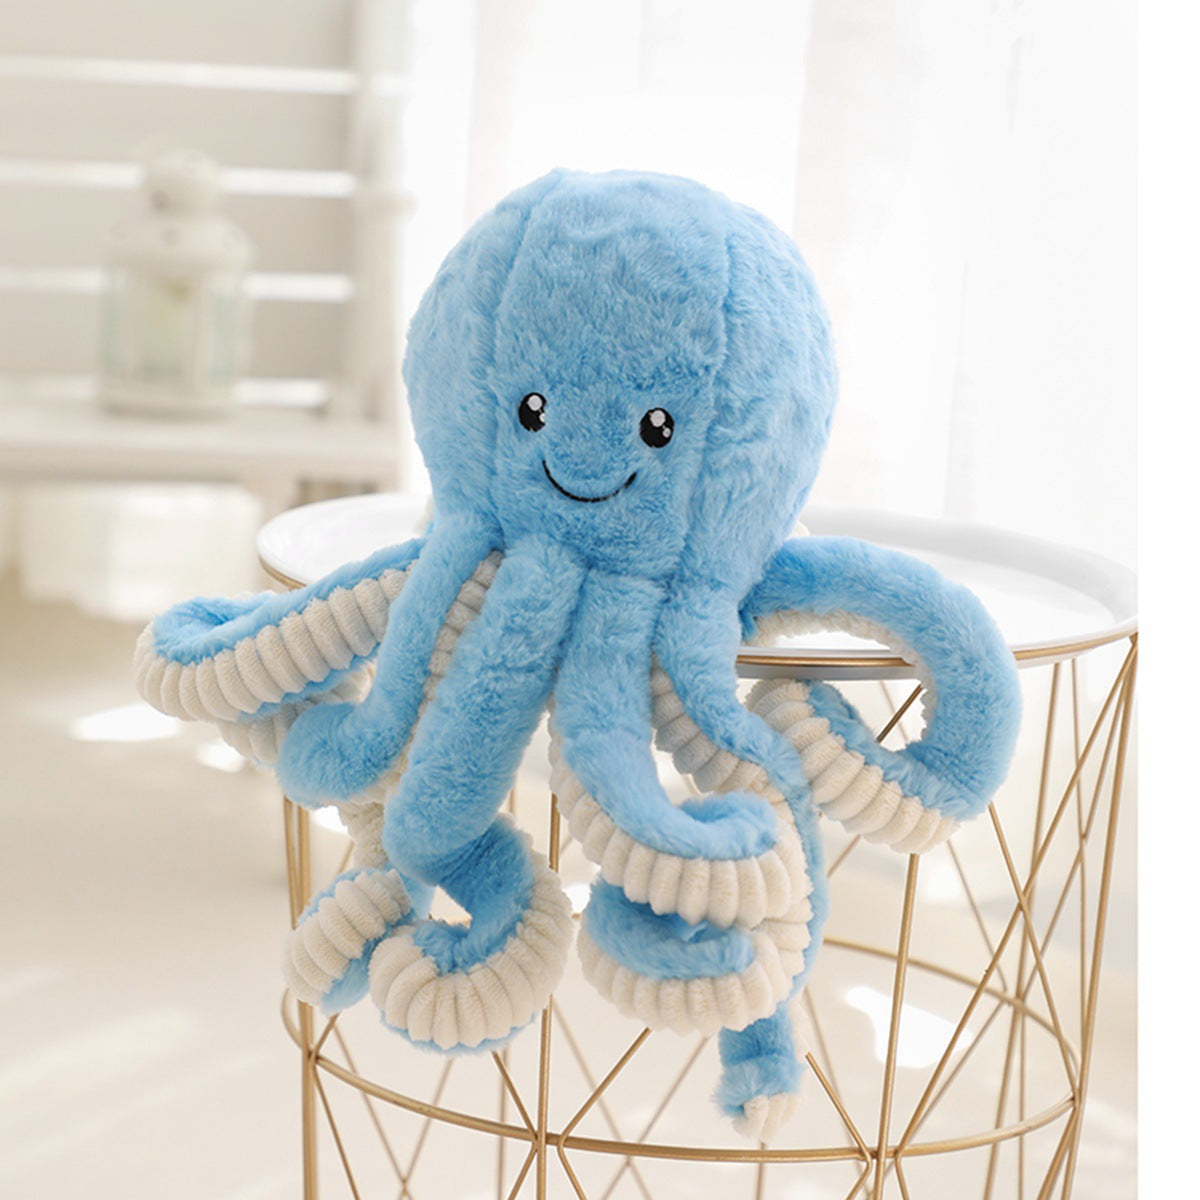 Lovely Simulation Octopus Pendant Plush Stuffed Toy Soft Animal Home Accessories Cute Doll Children Gifts - TryKid